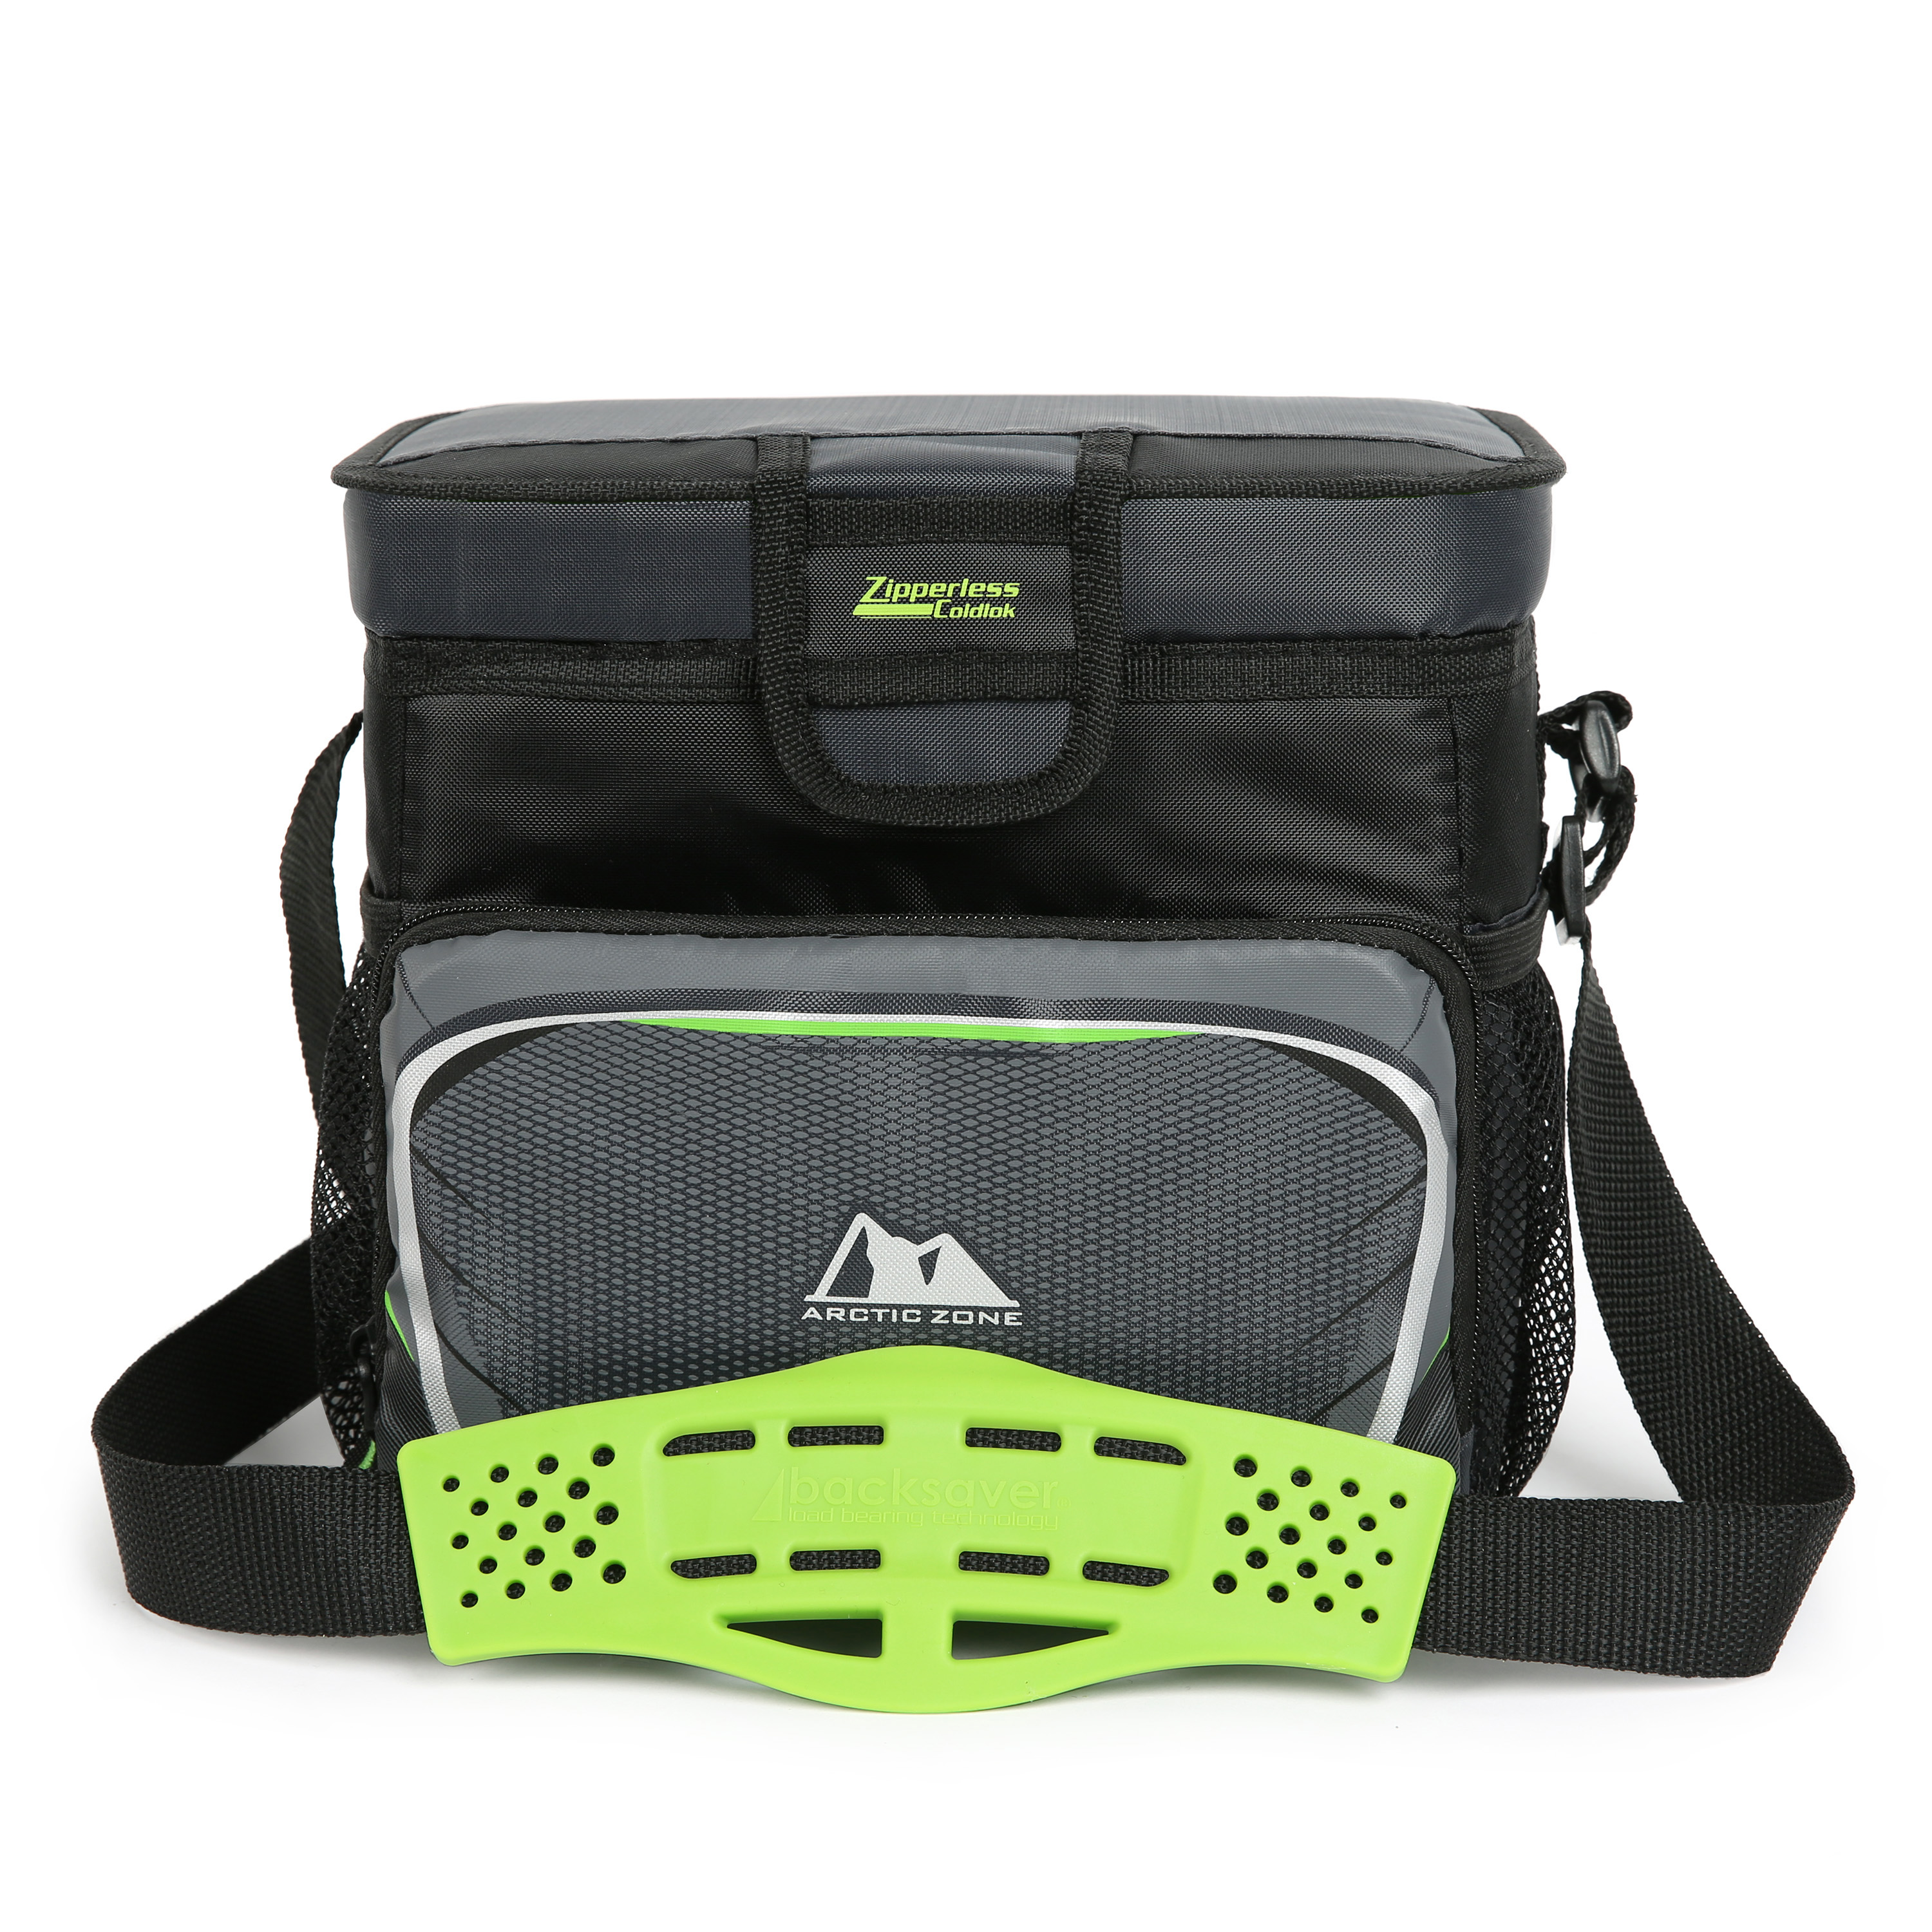 Arctic Zone 9 cans Zipperless Soft Sided Cooler with Hard Liner, Grey and Green - image 1 of 11